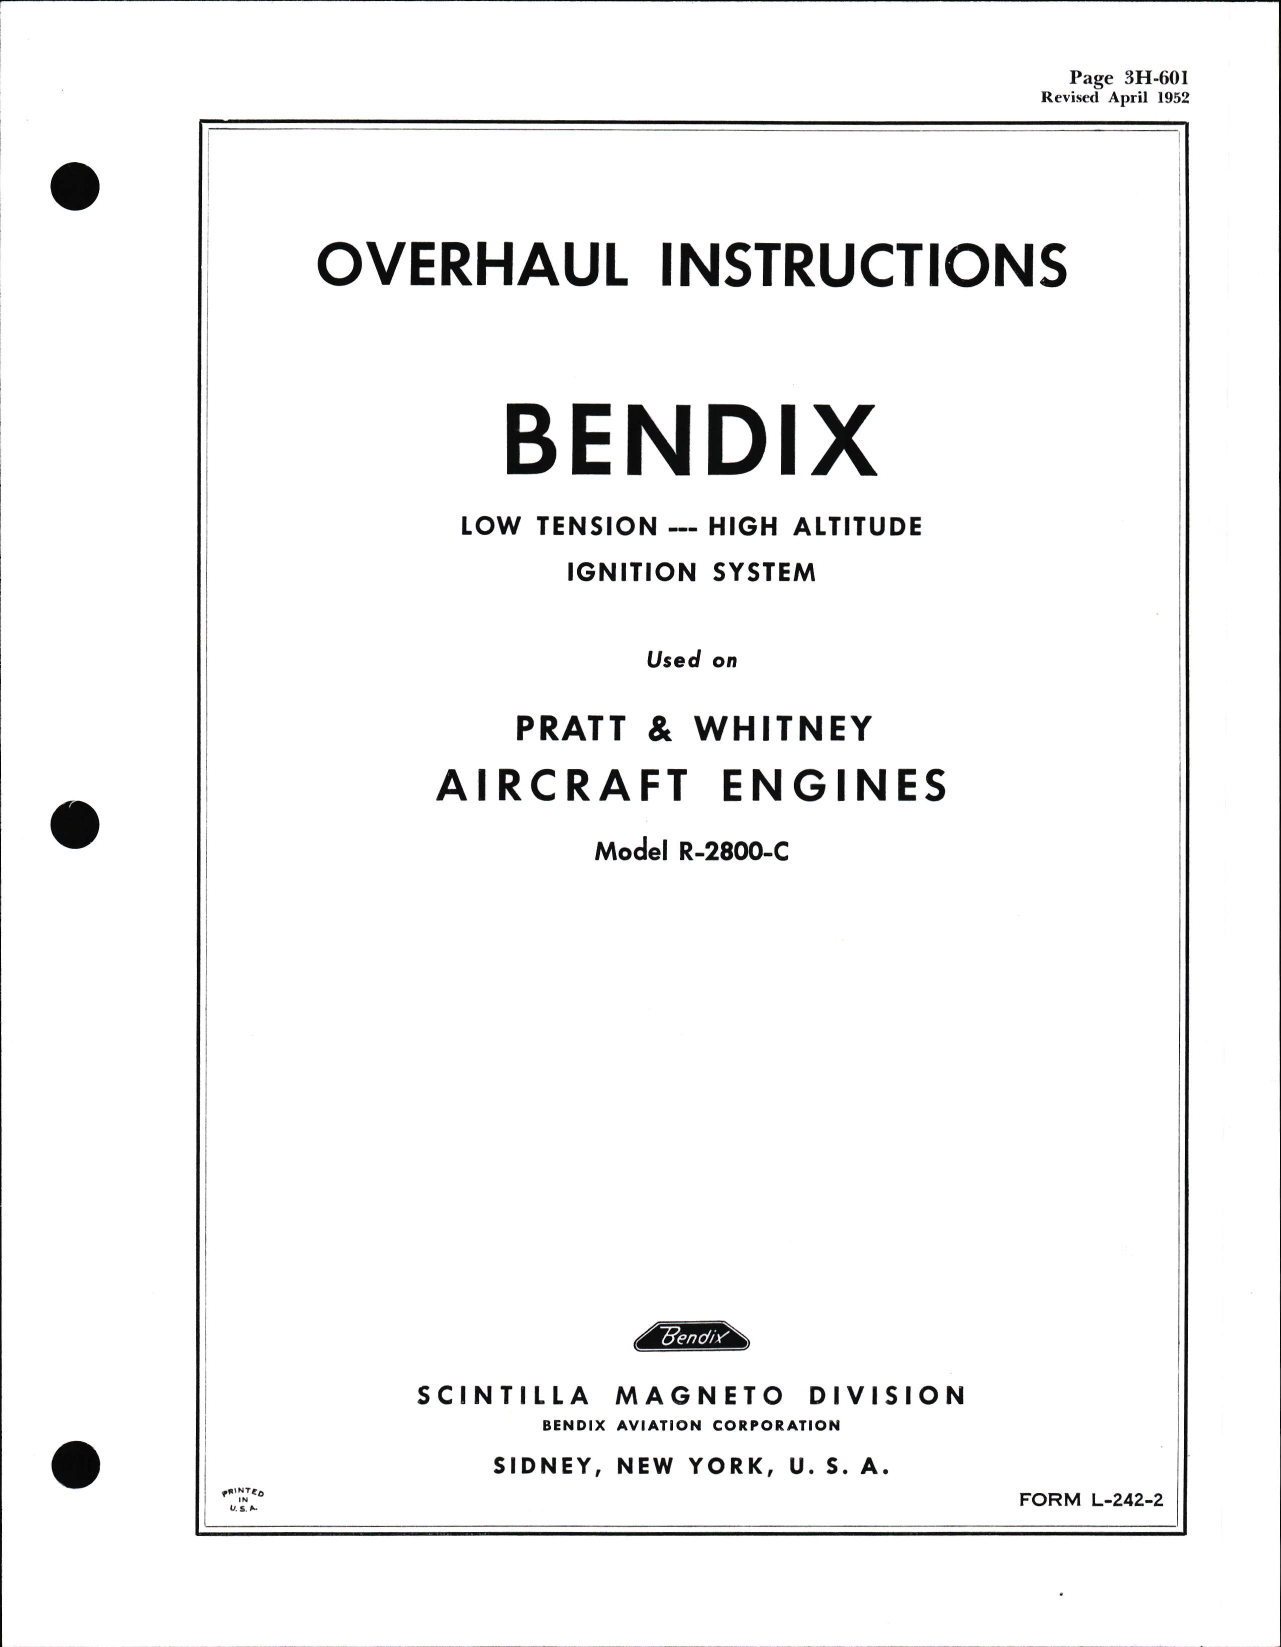 Sample page 1 from AirCorps Library document: Overhaul Instructions for Bendix Low Tension - High Altitude Ignition for Pratt & Whitney R-2800-C